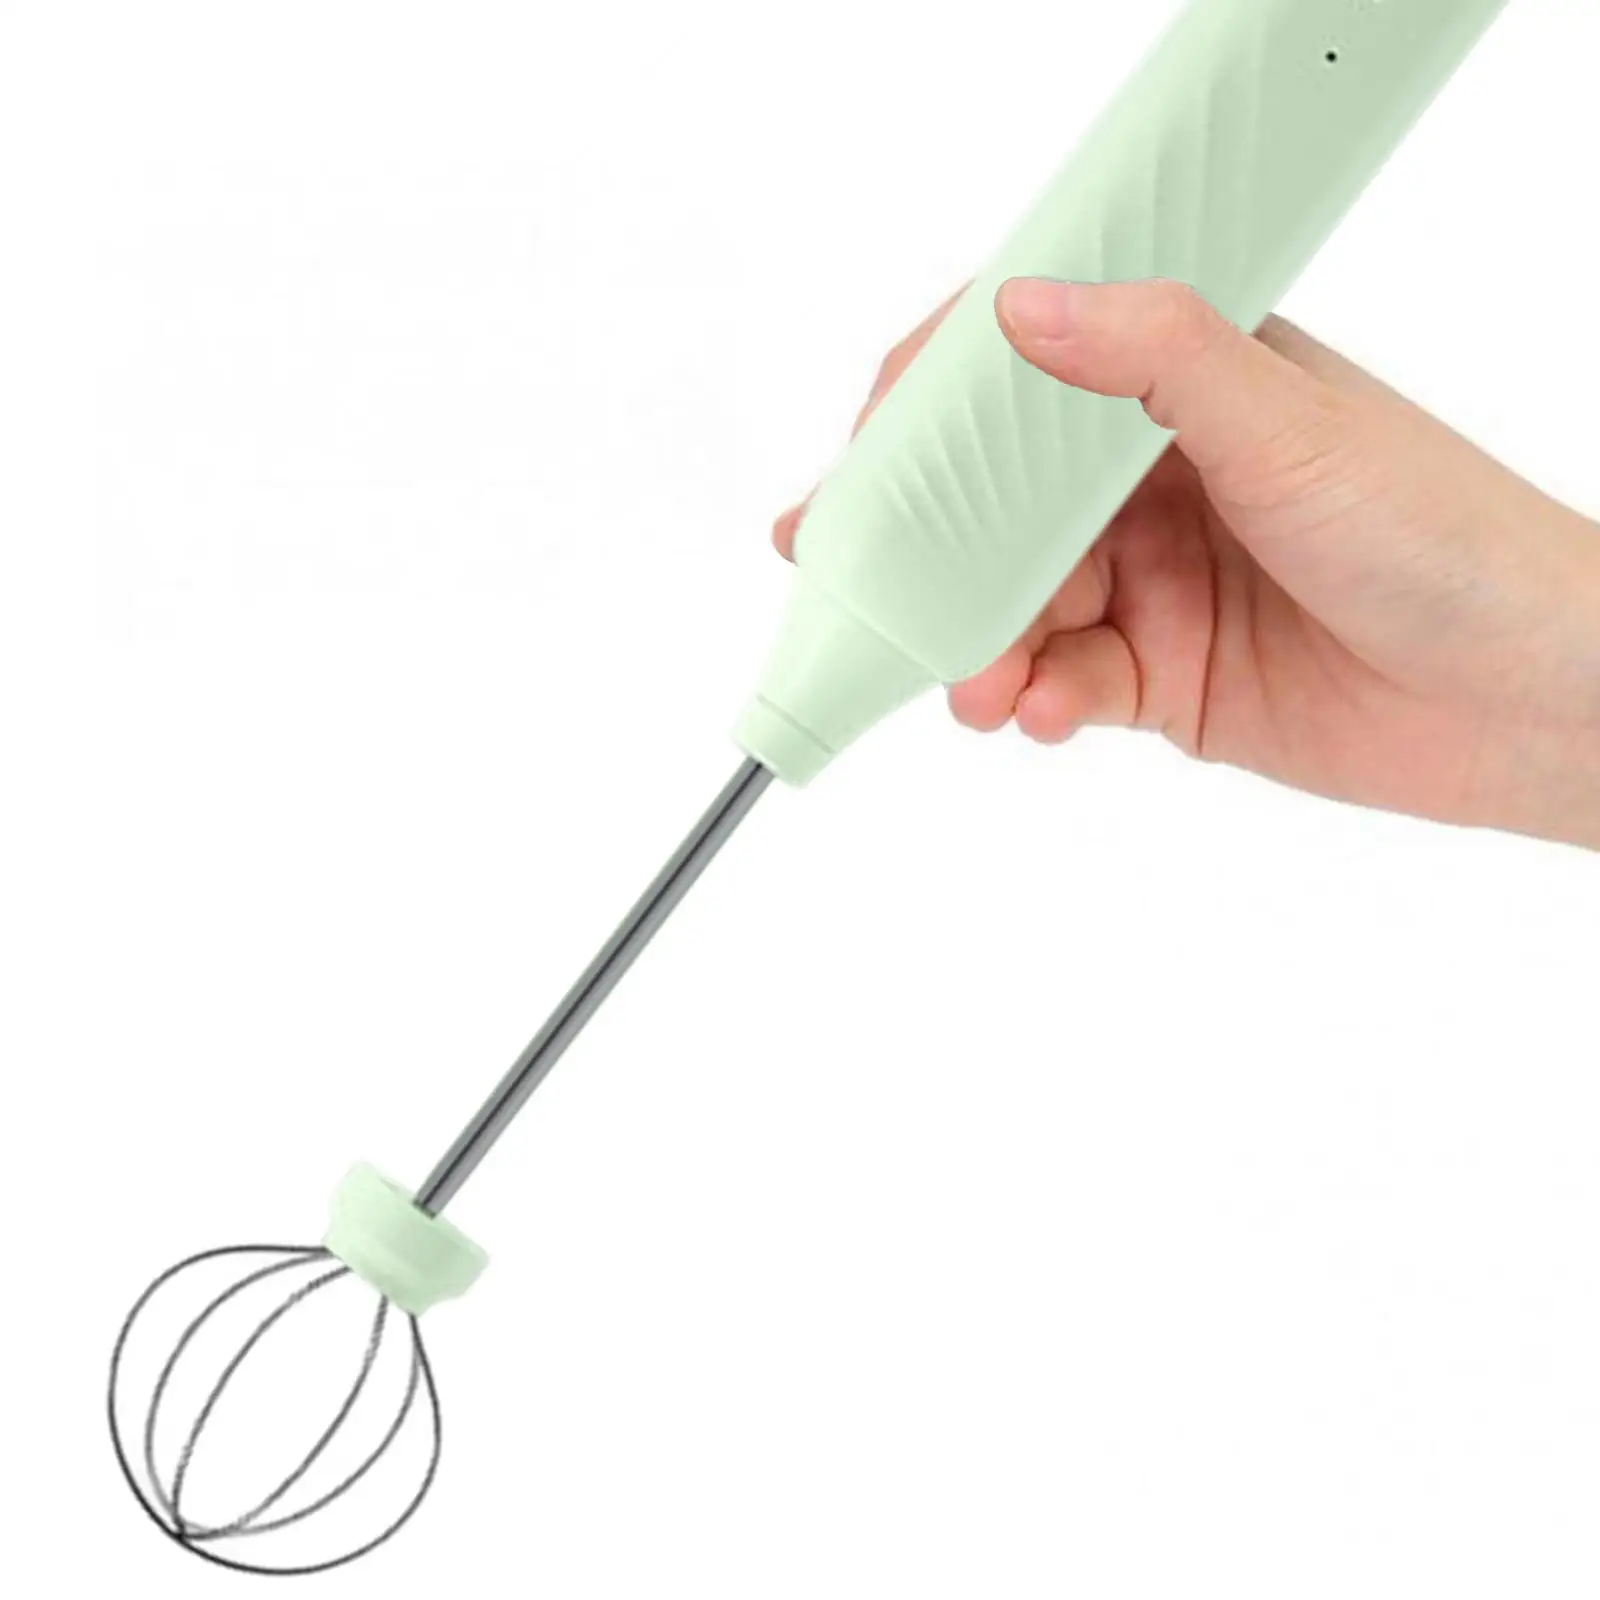 Handheld Milk Frother Egg Beater Adjustable Speed Cordless Cream Mixer for Baking